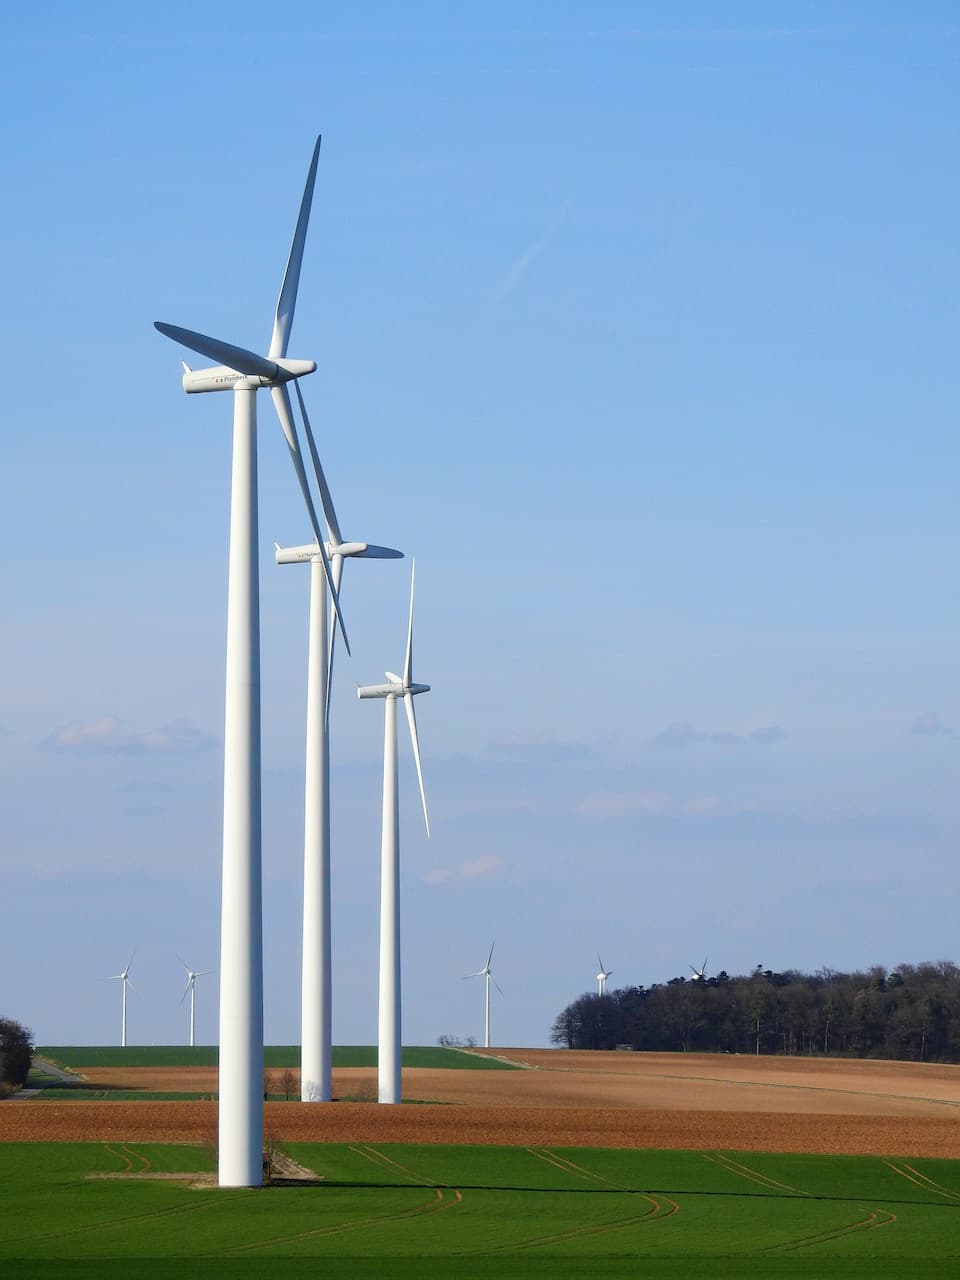 UK wants to fully switch to wind power by 2030(1)